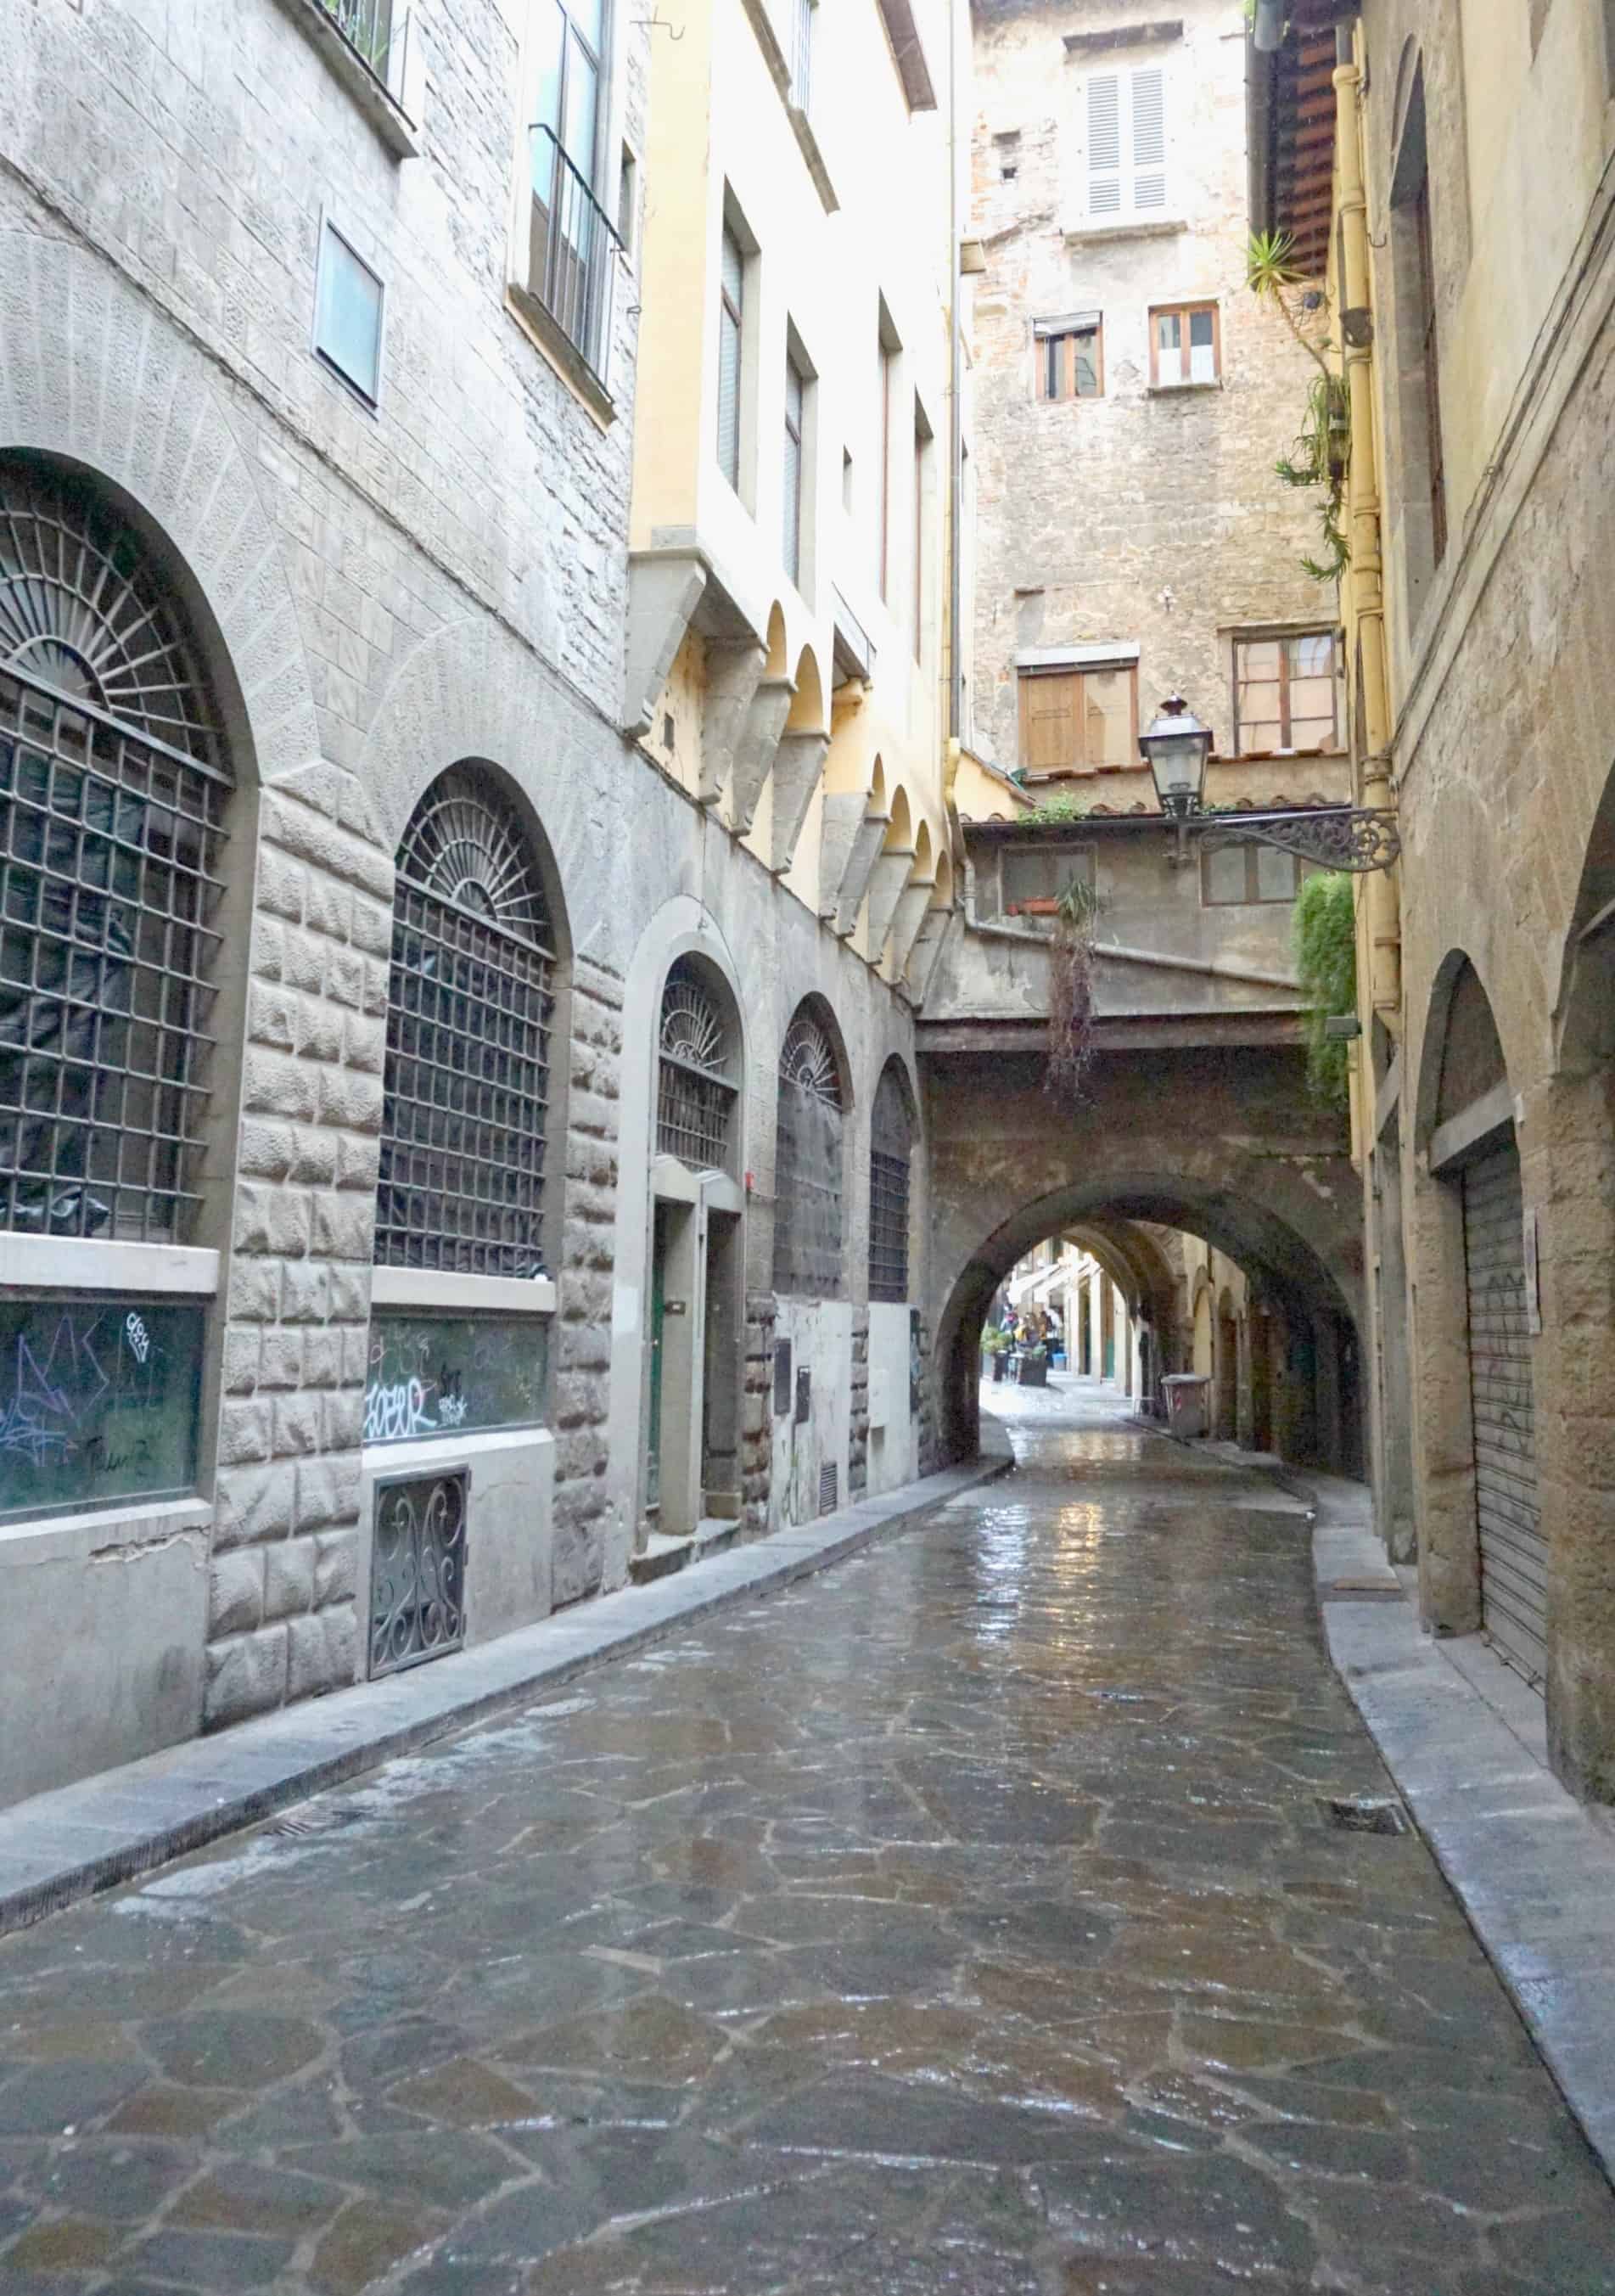 Off the beaten path exploring the streets of Italy, tour guides help you to see the real city.